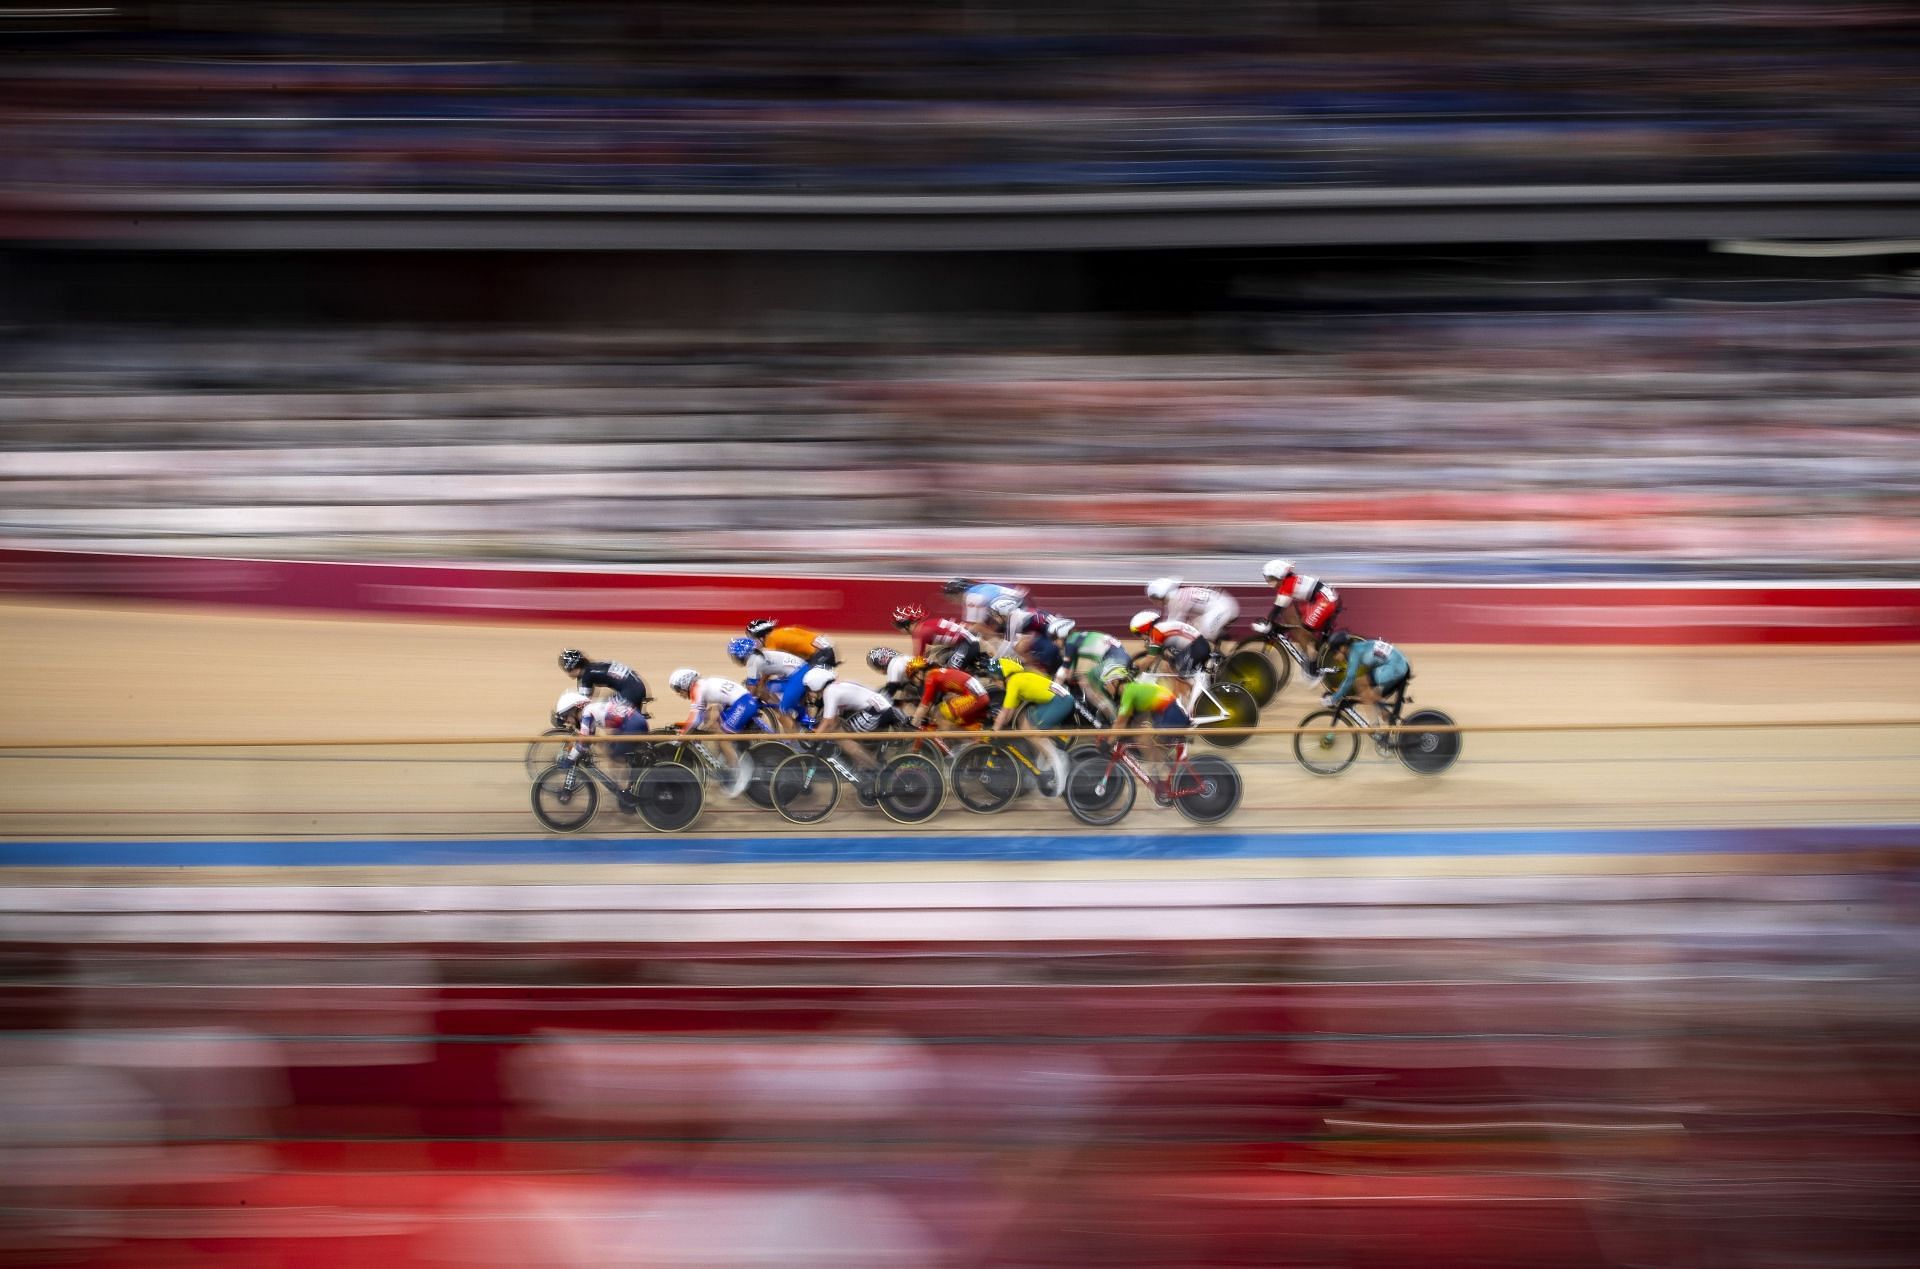 Representative pic: A cycling event in progress. (PC: Getty Images)